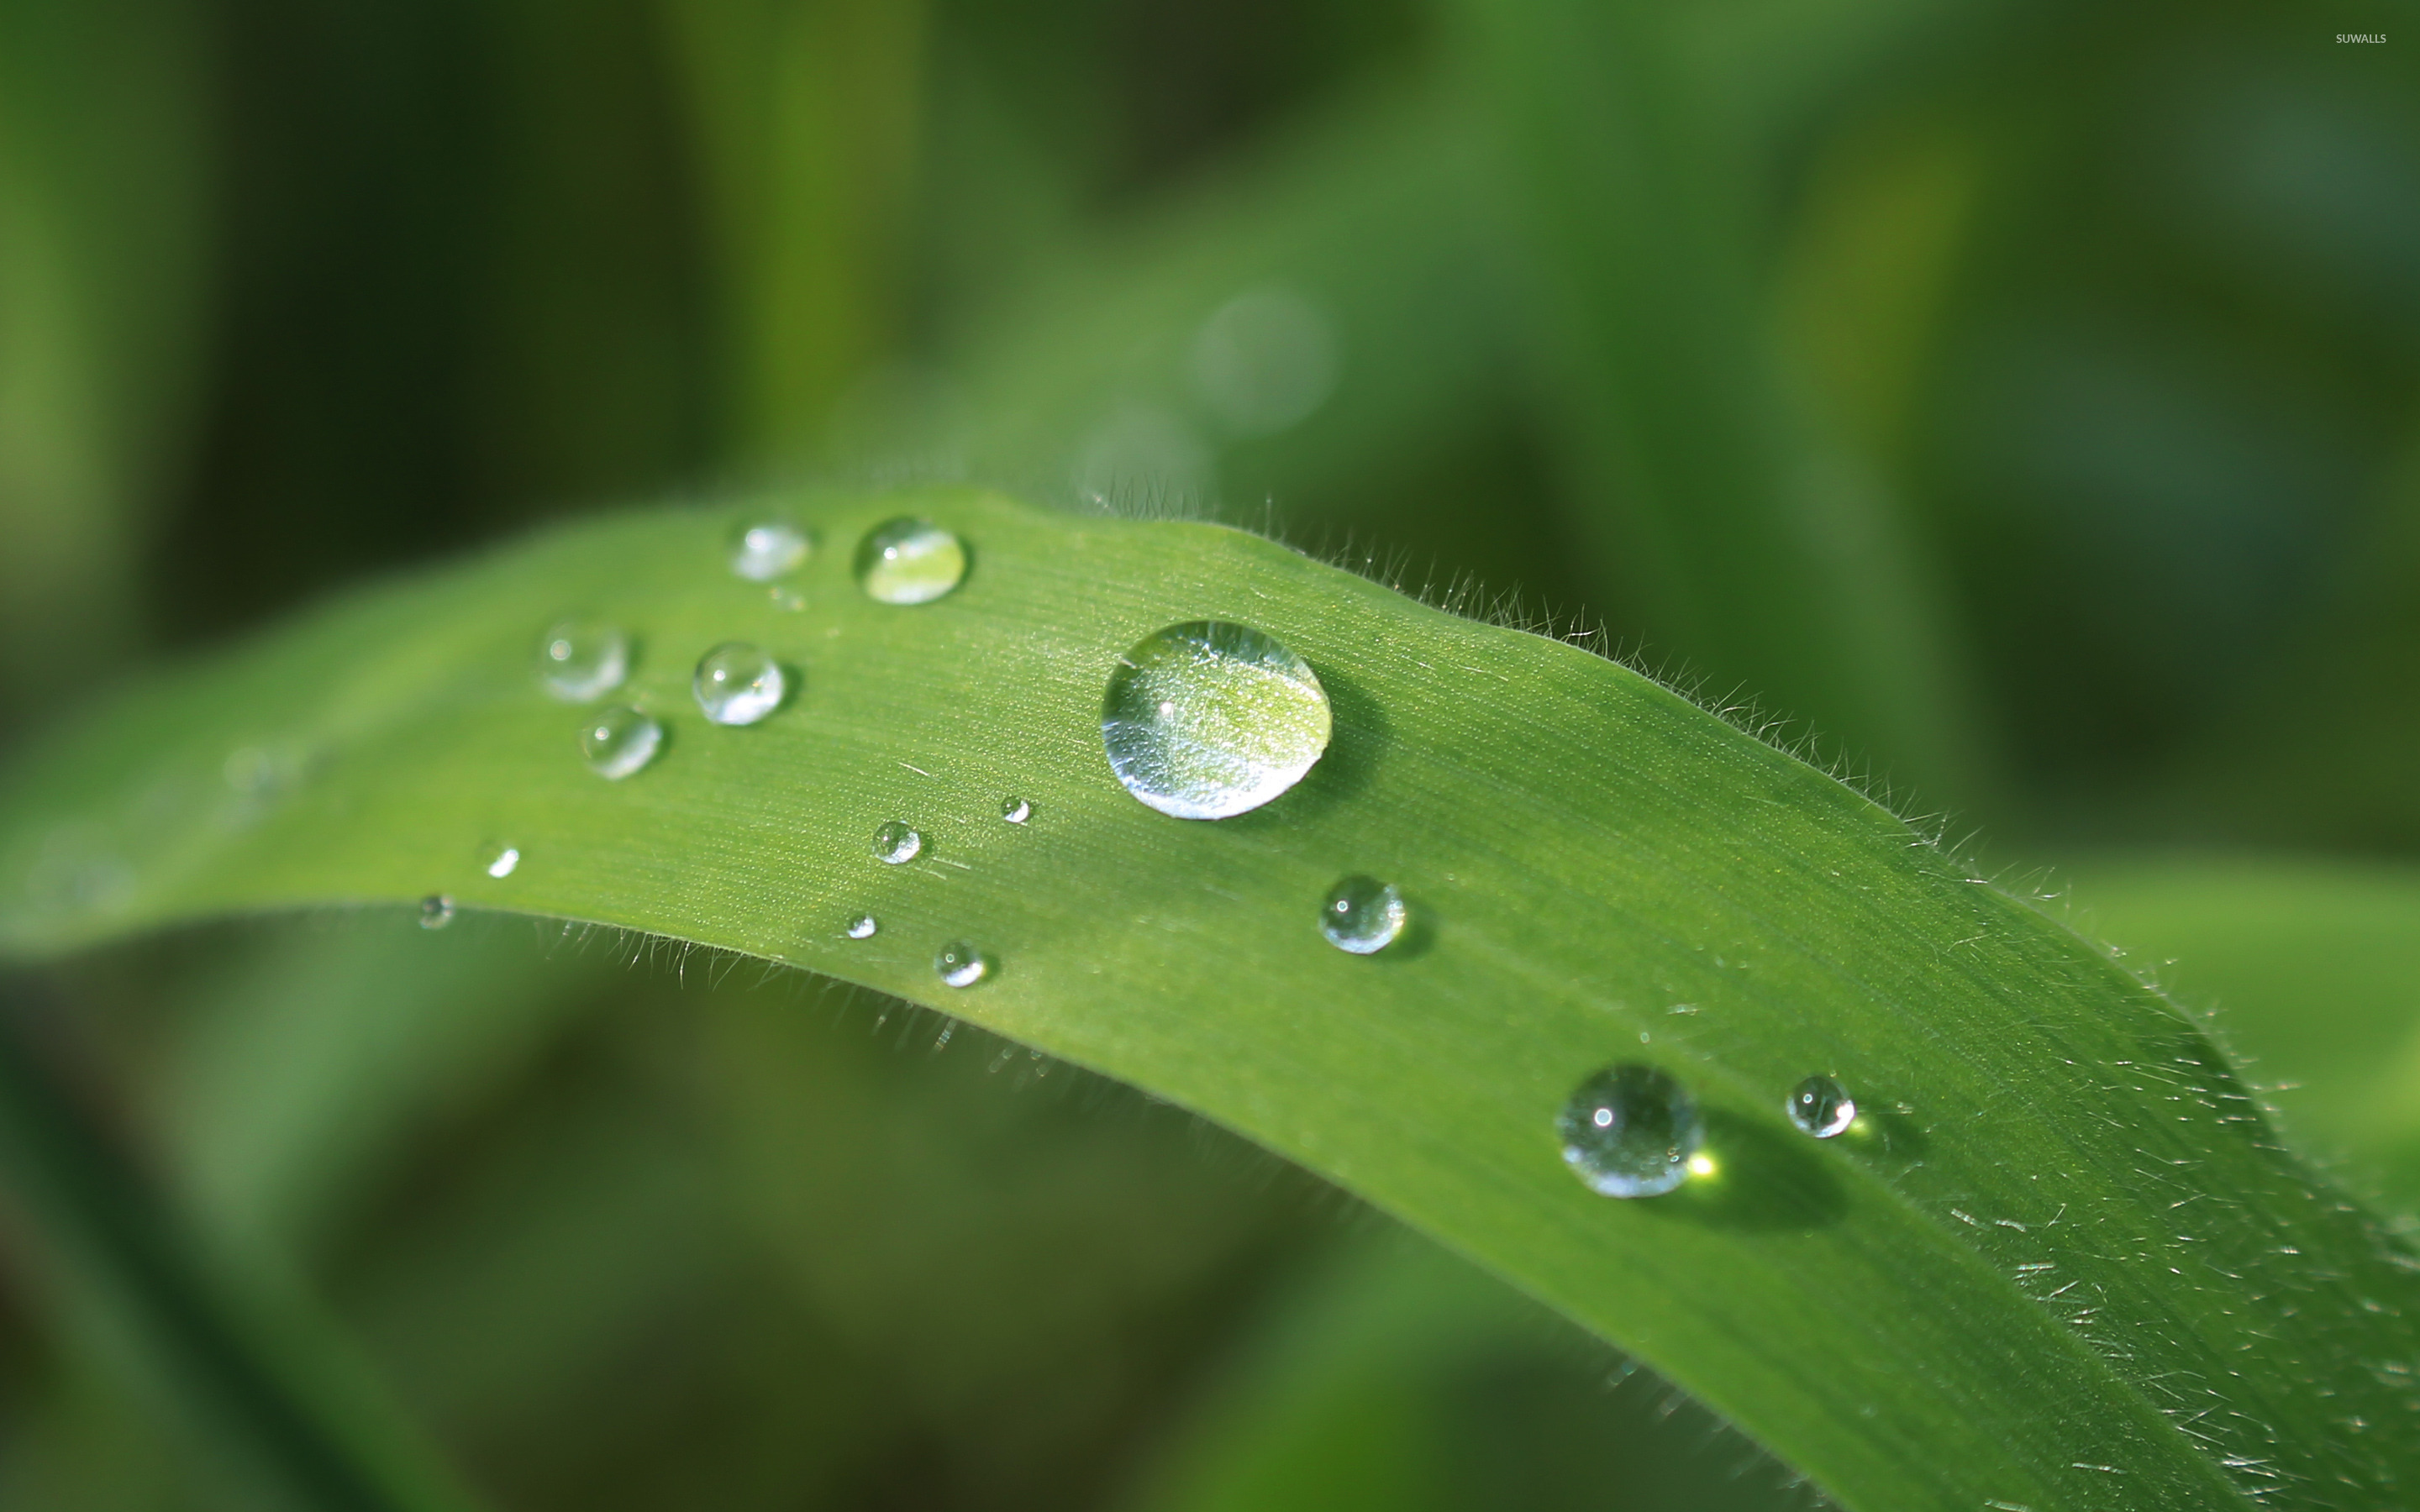 Rain droplets on a leaf wallpaper - Nature wallpapers - #30716